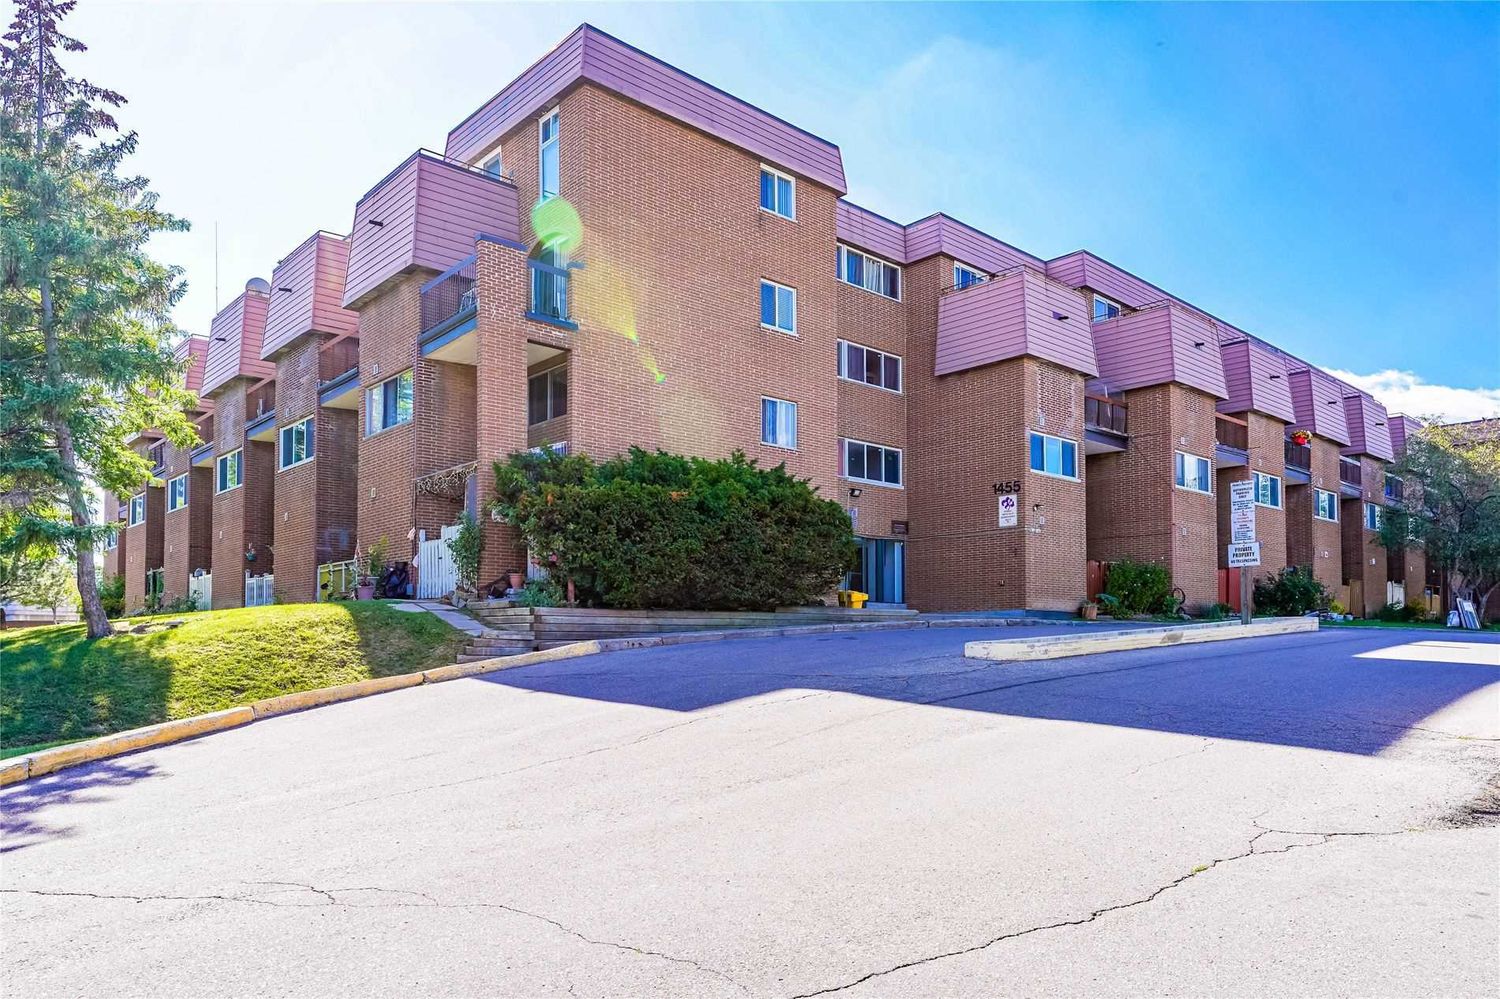 1335-1455 Williamsport Dr. This condo townhouse at 1335-1455 Williamsport Drive Condos is located in  Mississauga, Toronto - image #1 of 2 by Strata.ca